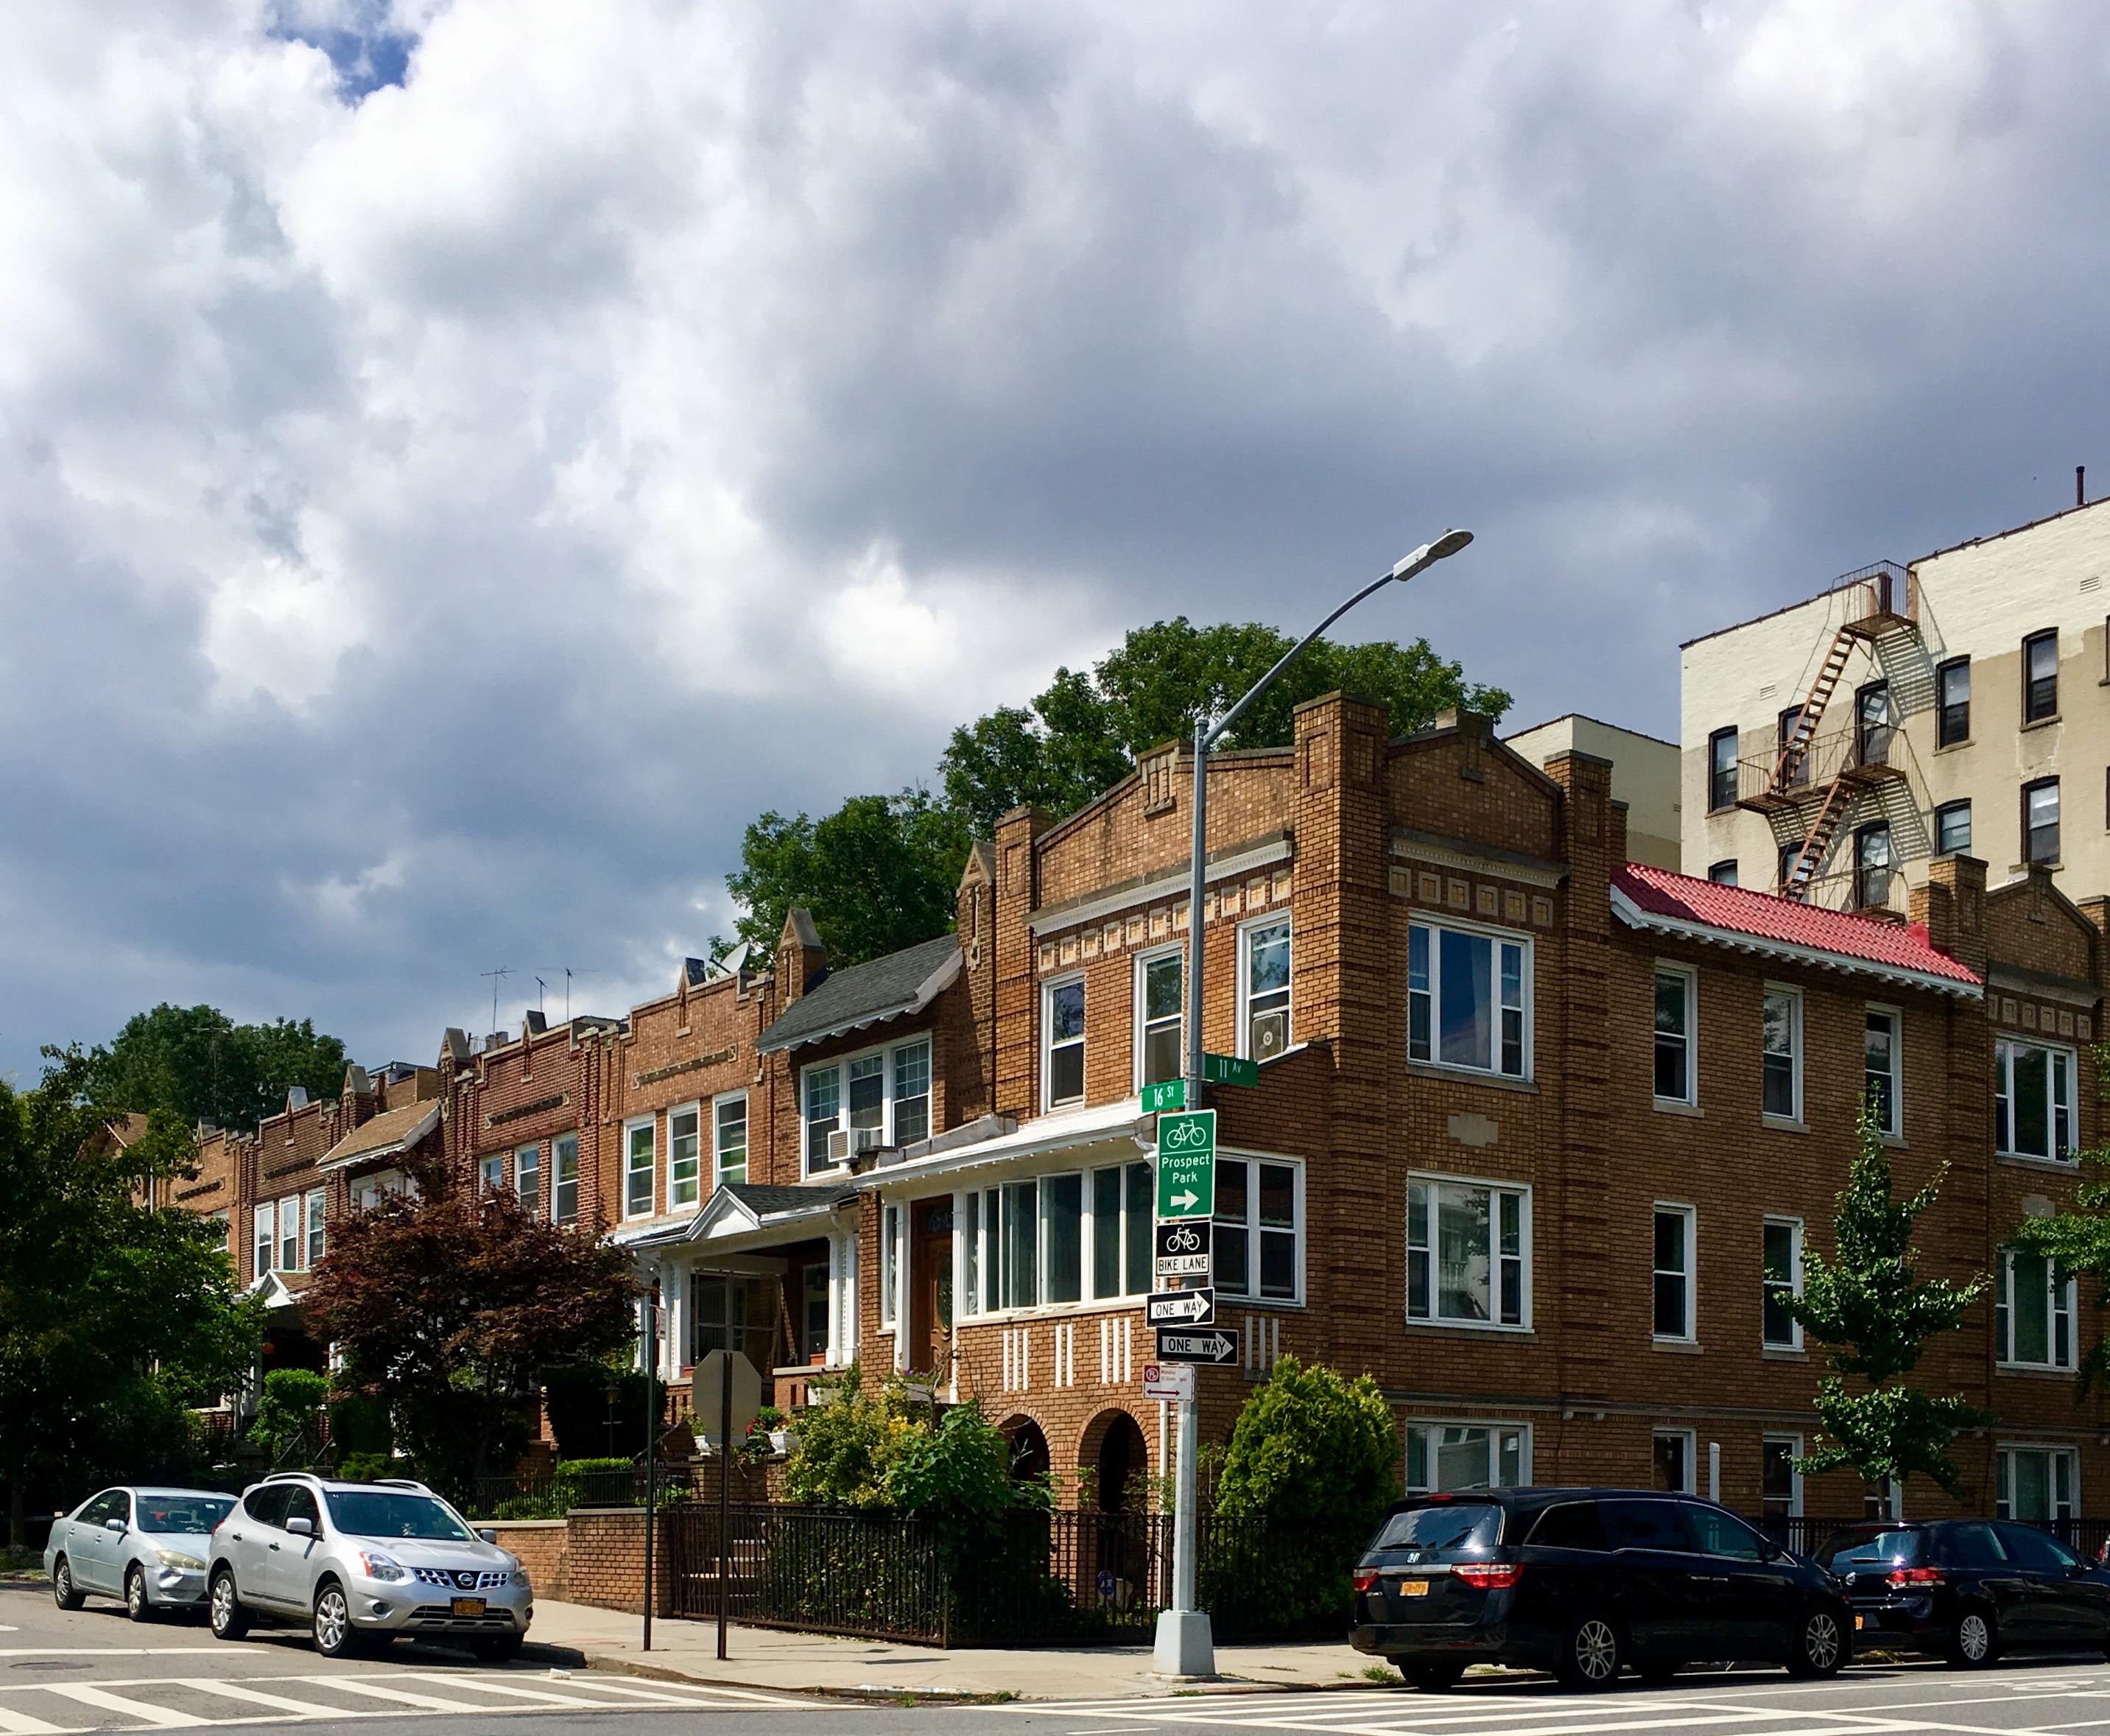 Clouds add drama to this Windsor Terrace streetscape. Eagle photo by Lore Croghan